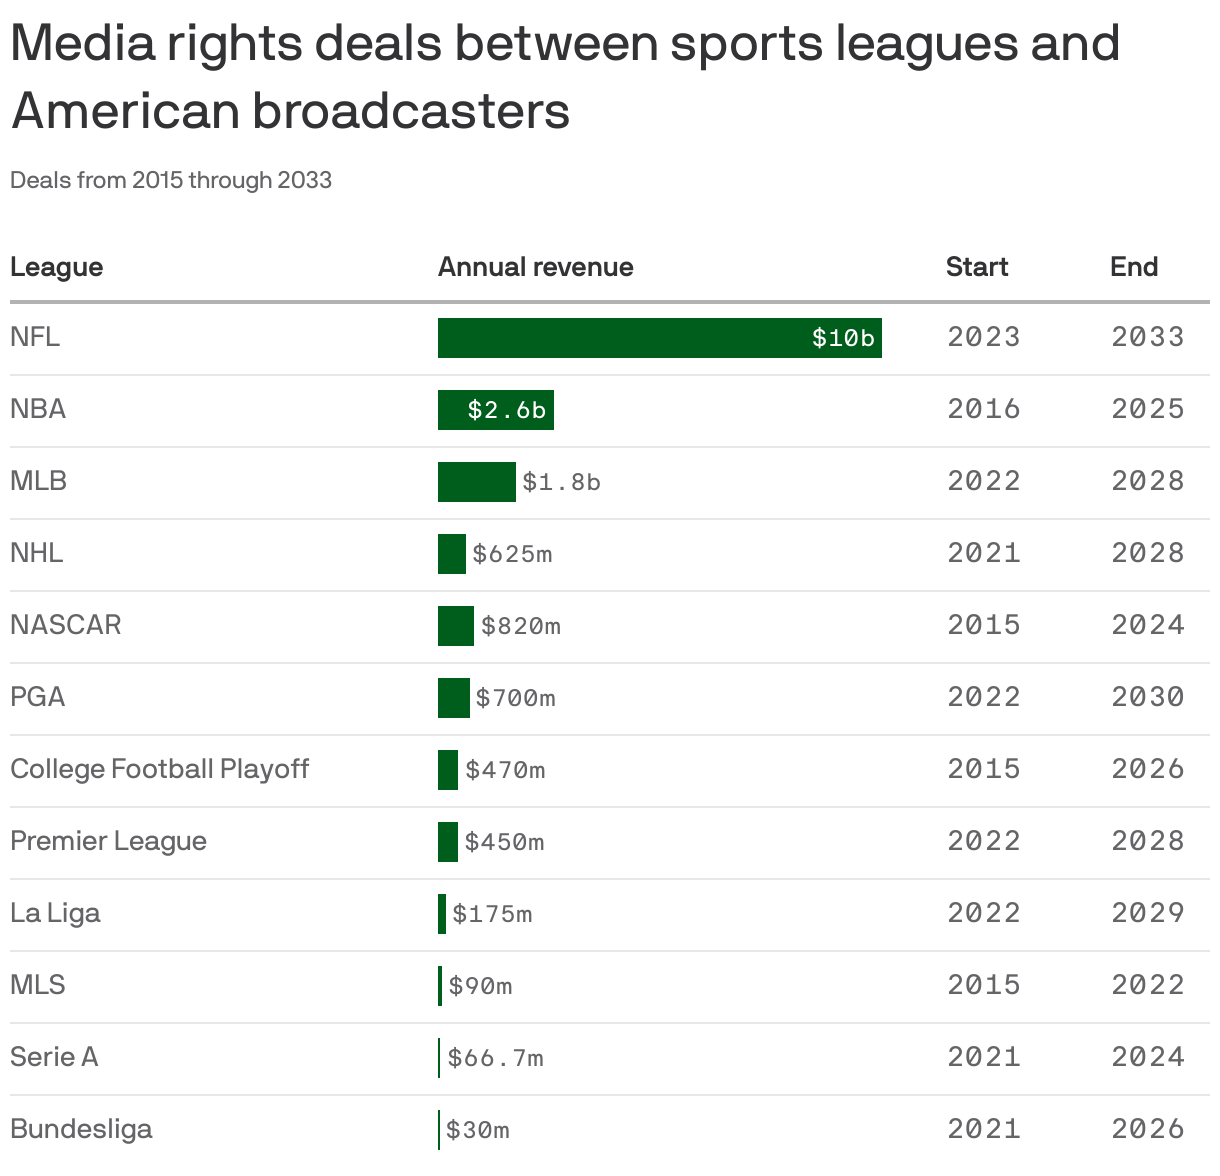 Media rights deals between sports leagues and American broadcasters